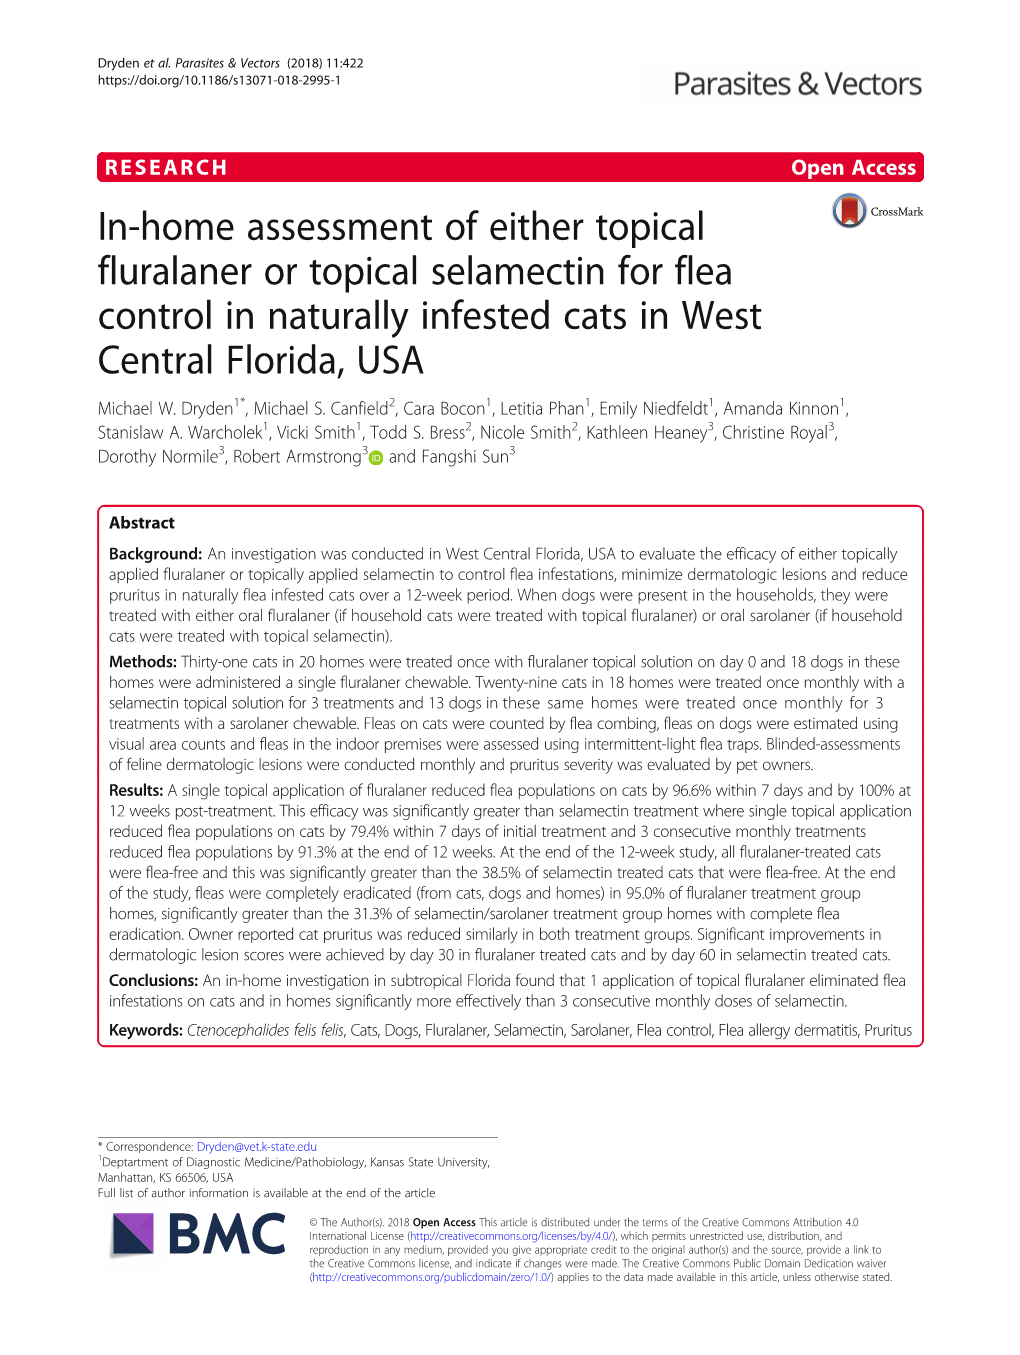 In-Home Assessment of Either Topical Fluralaner Or Topical Selamectin for Flea Control in Naturally Infested Cats in West Central Florida, USA Michael W